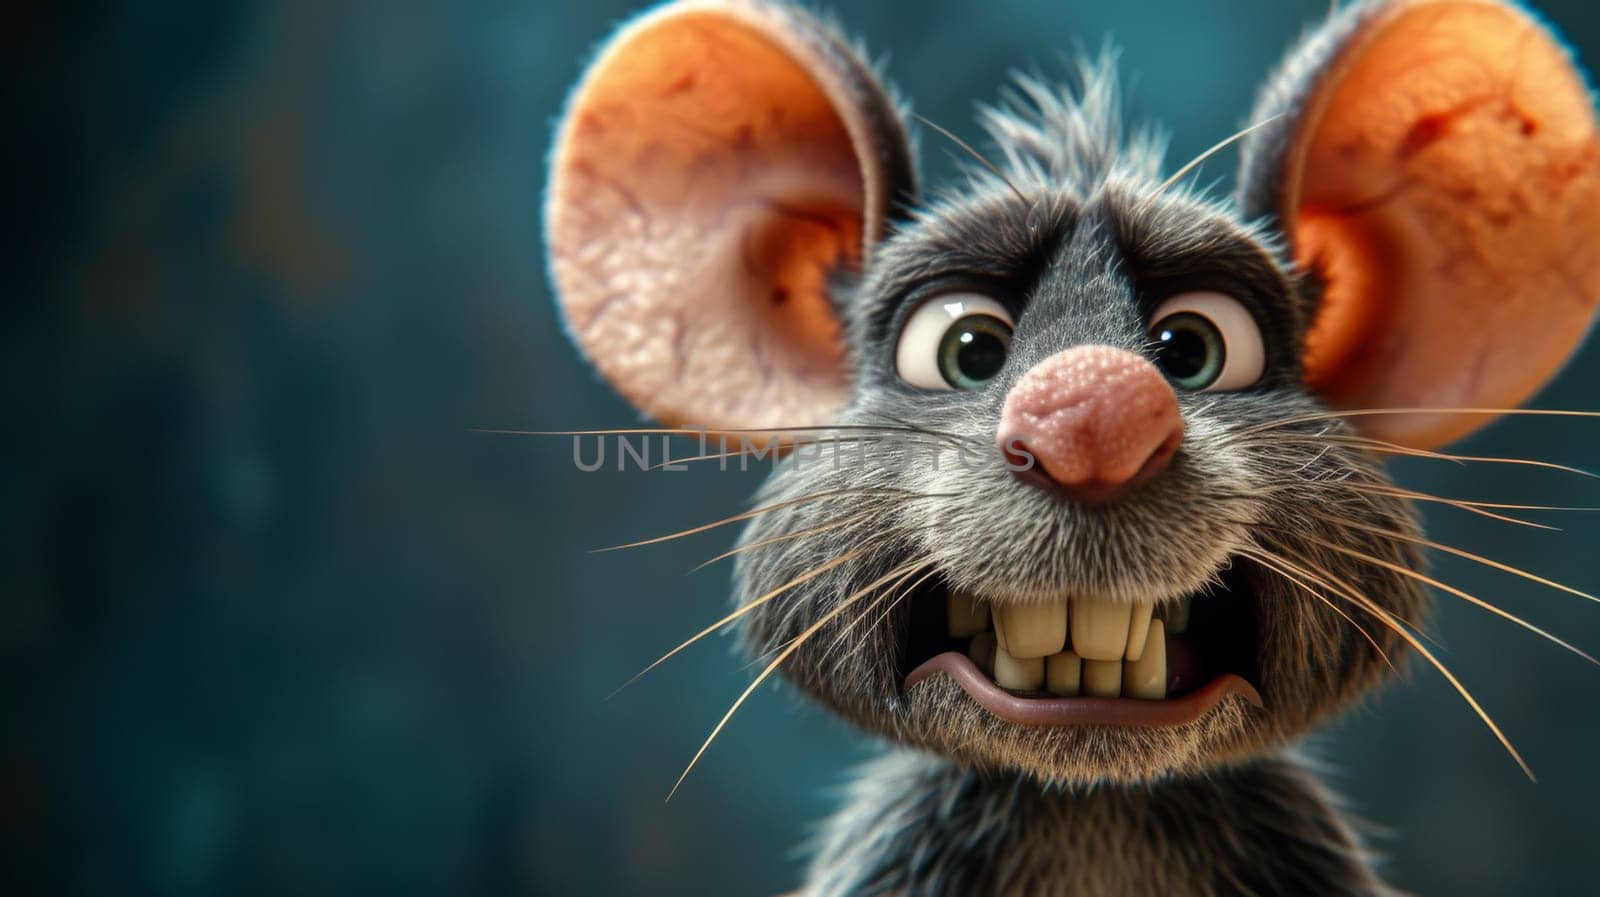 A close up of a rat with big ears and an angry look